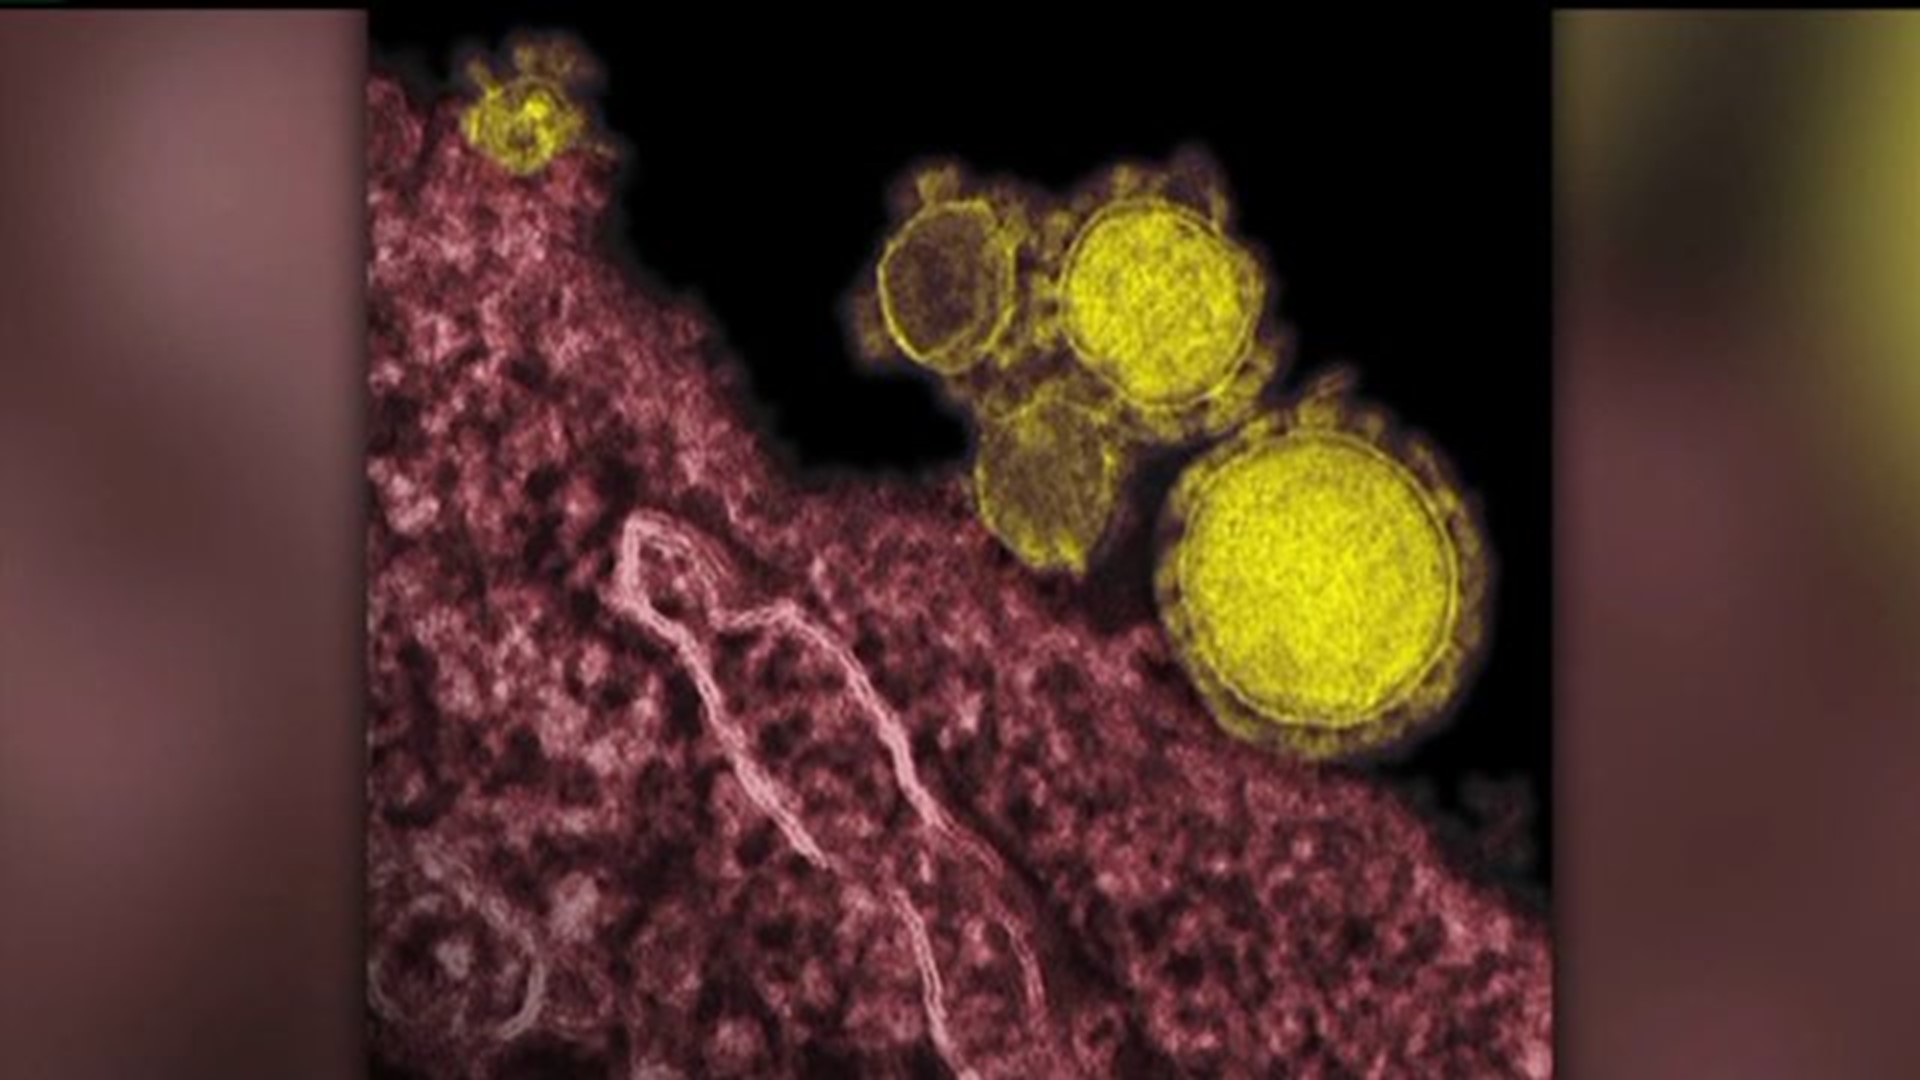 CDC says Illinois patient did not have MERS